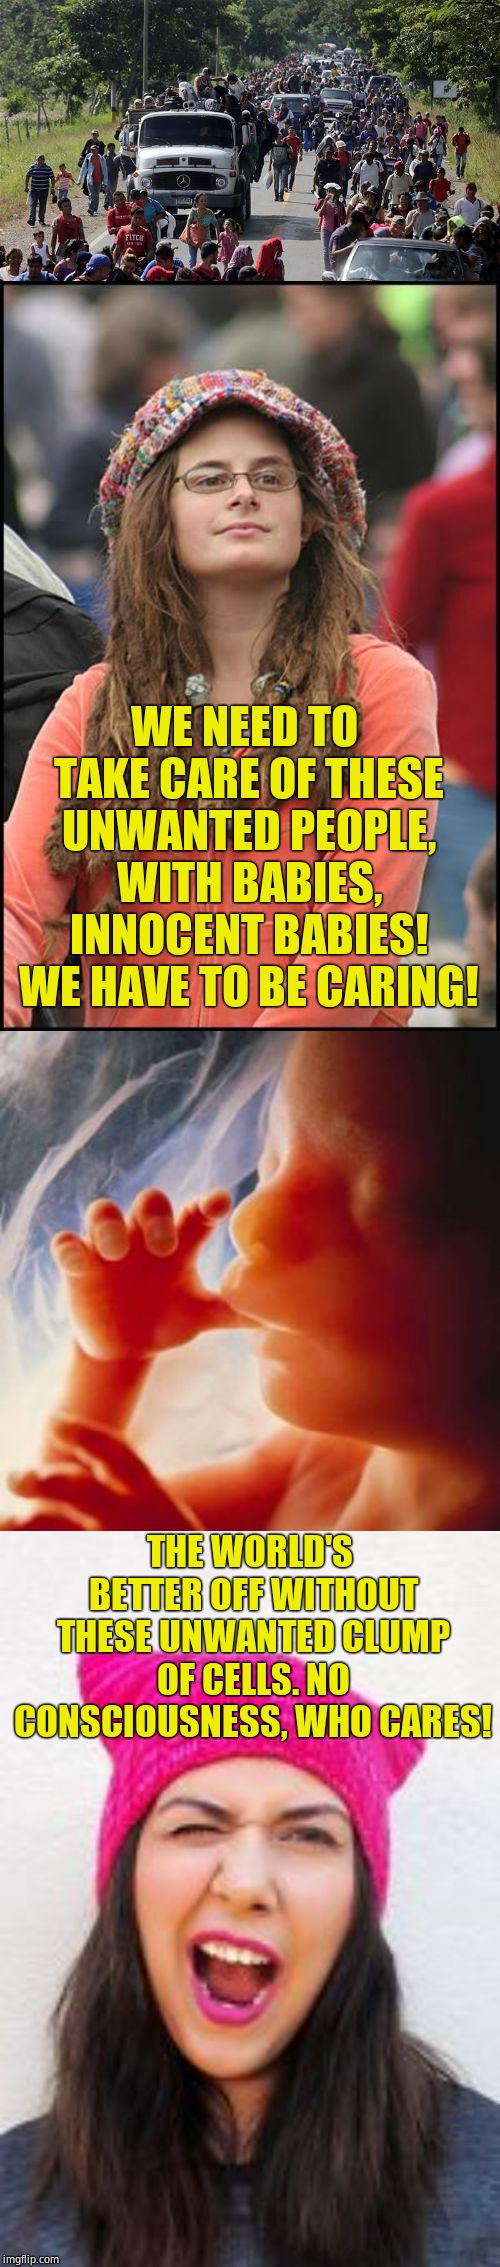 THE WORLD'S BETTER OFF WITHOUT THESE UNWANTED CLUMP OF CELLS. NO CONSCIOUSNESS, WHO CARES! WE NEED TO TAKE CARE OF THESE UNWANTED PEOPLE, WI | image tagged in memes,college liberal,fetus,pink pussy hat,illegal caravan | made w/ Imgflip meme maker